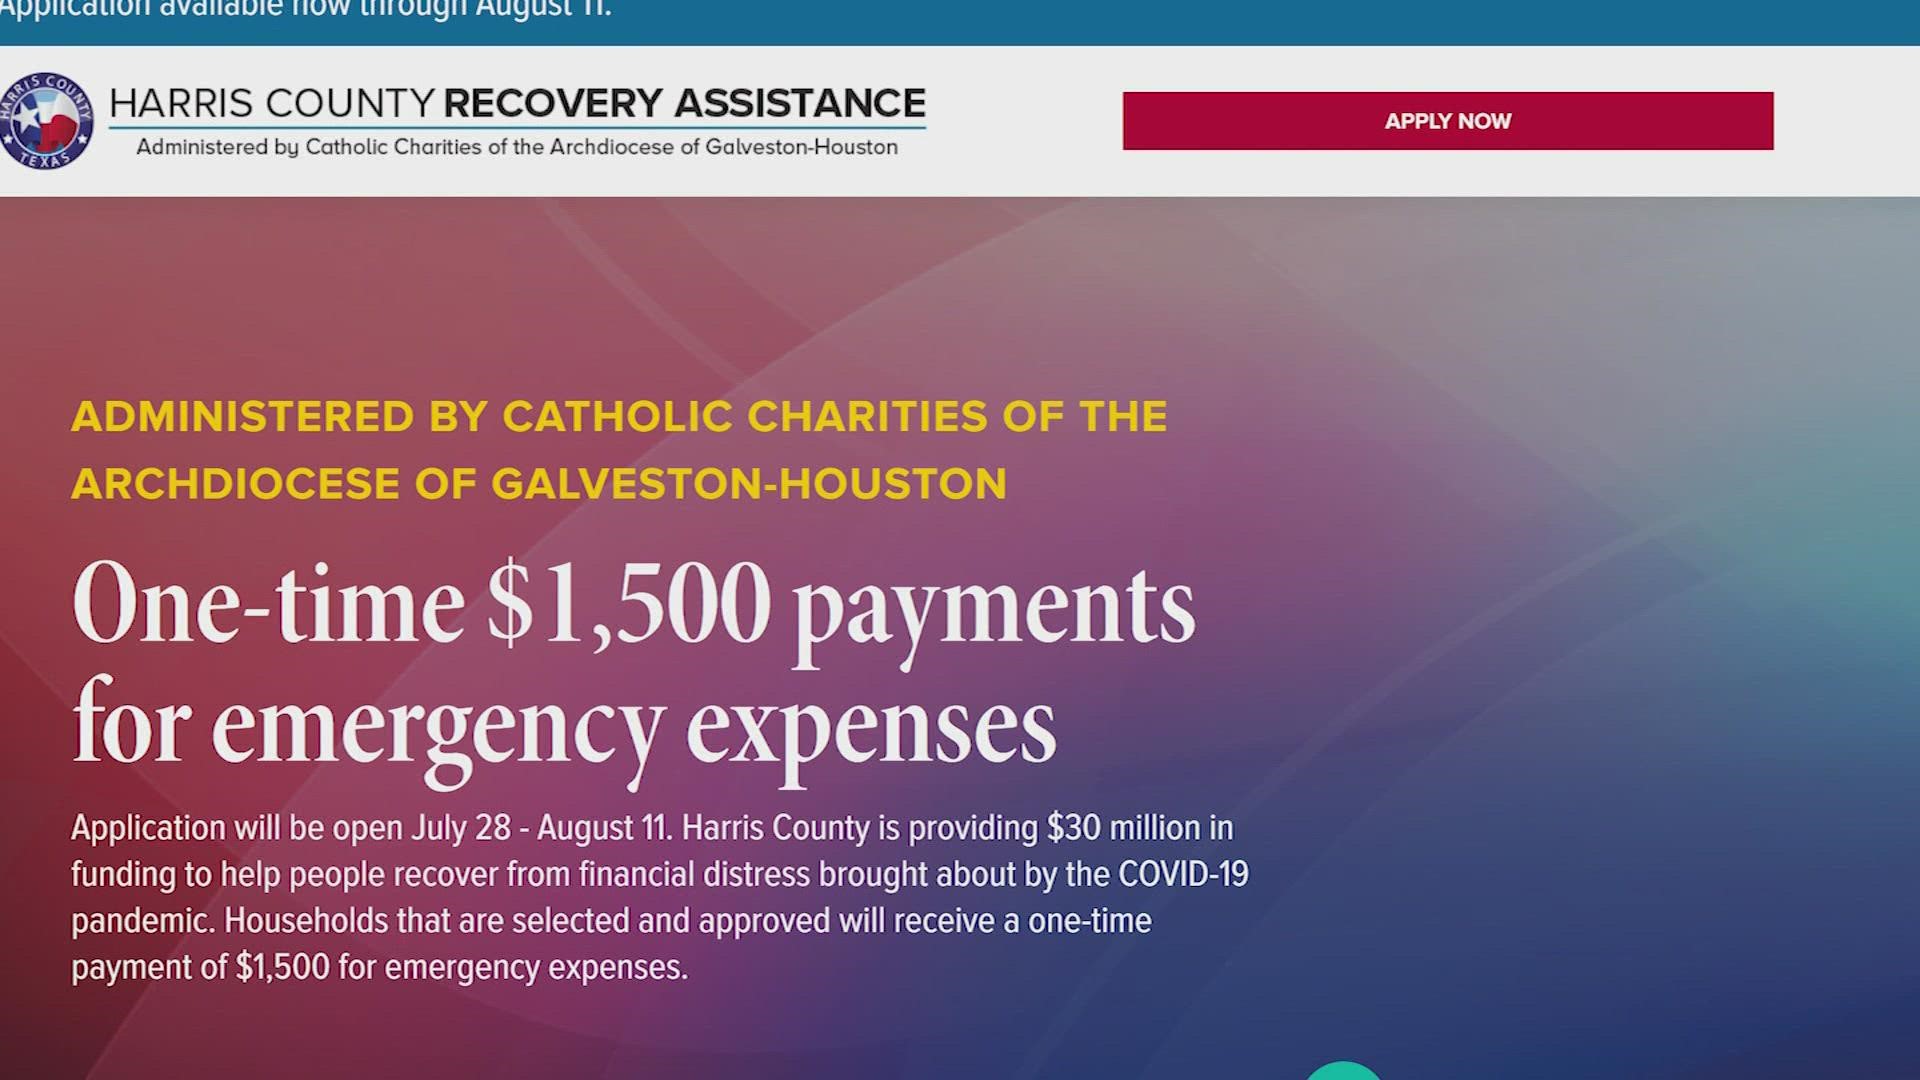 The Harris County Recovery Assistance program provides a $1,500 direct payment to families still impacted by the pandemic.